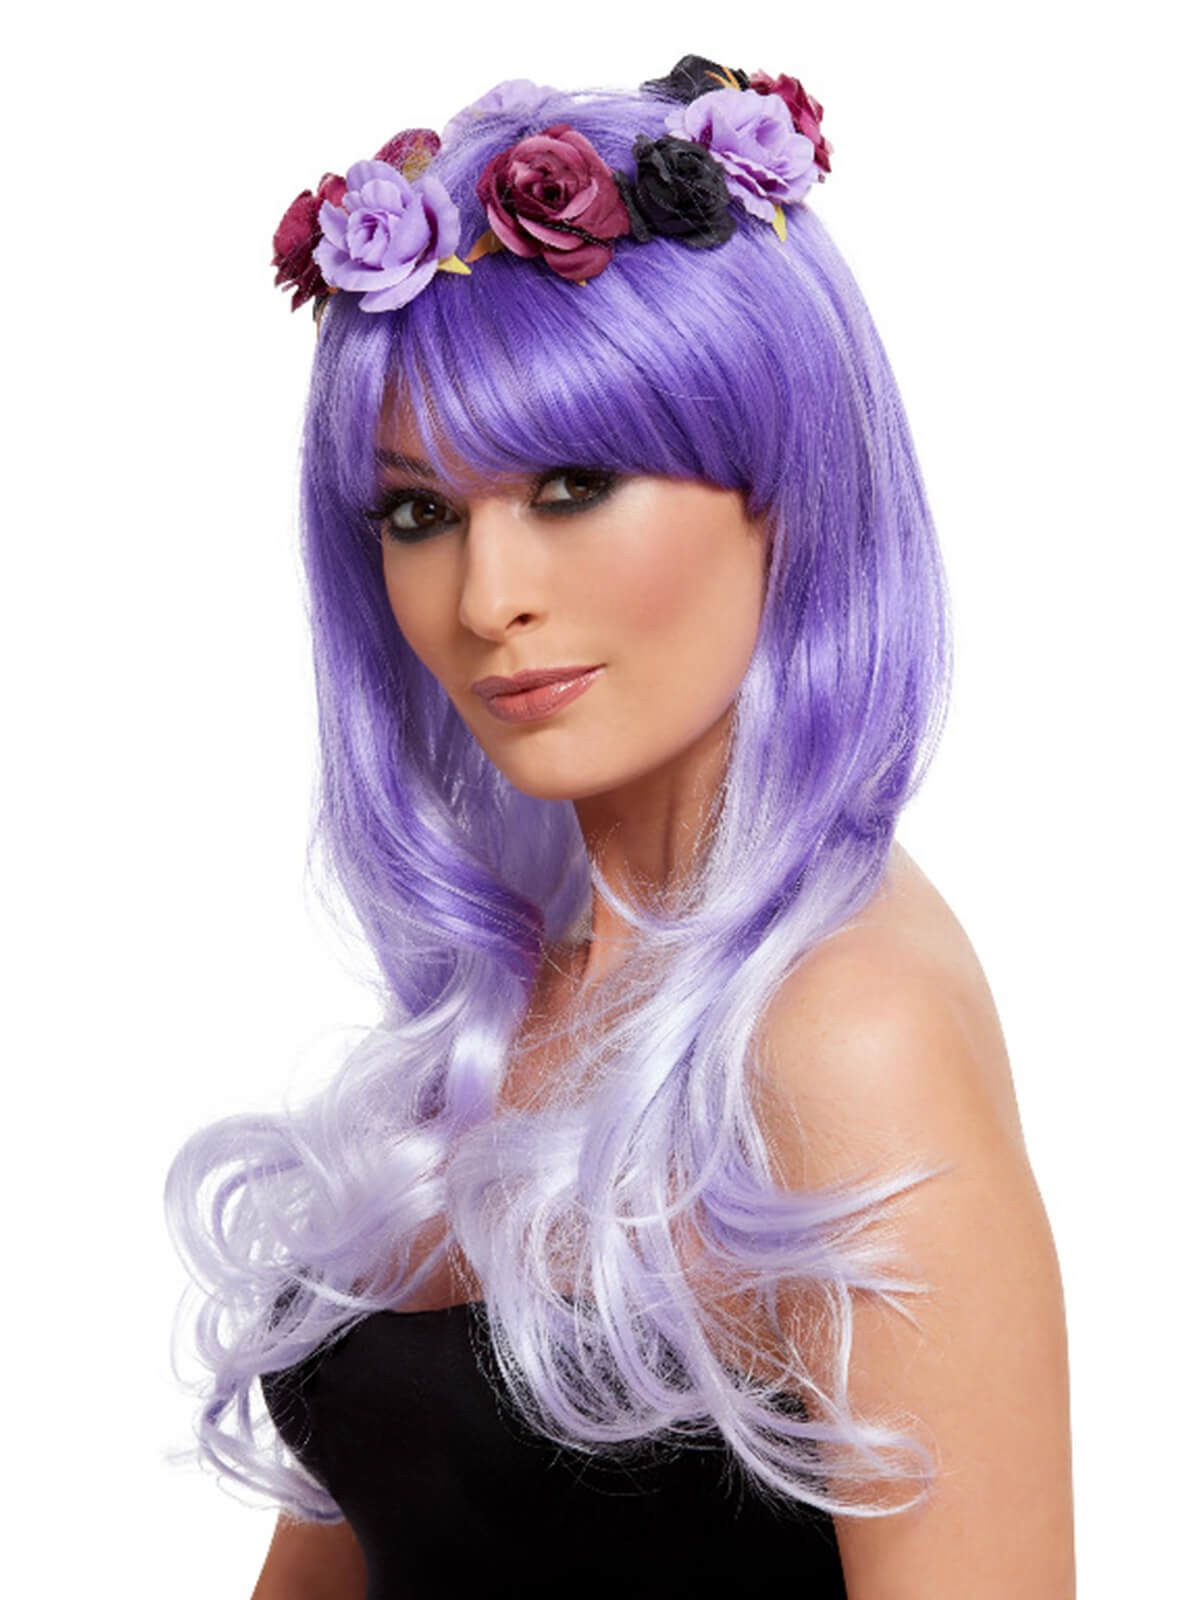 Deluxe Day of the Dead Glam Wig, Purple